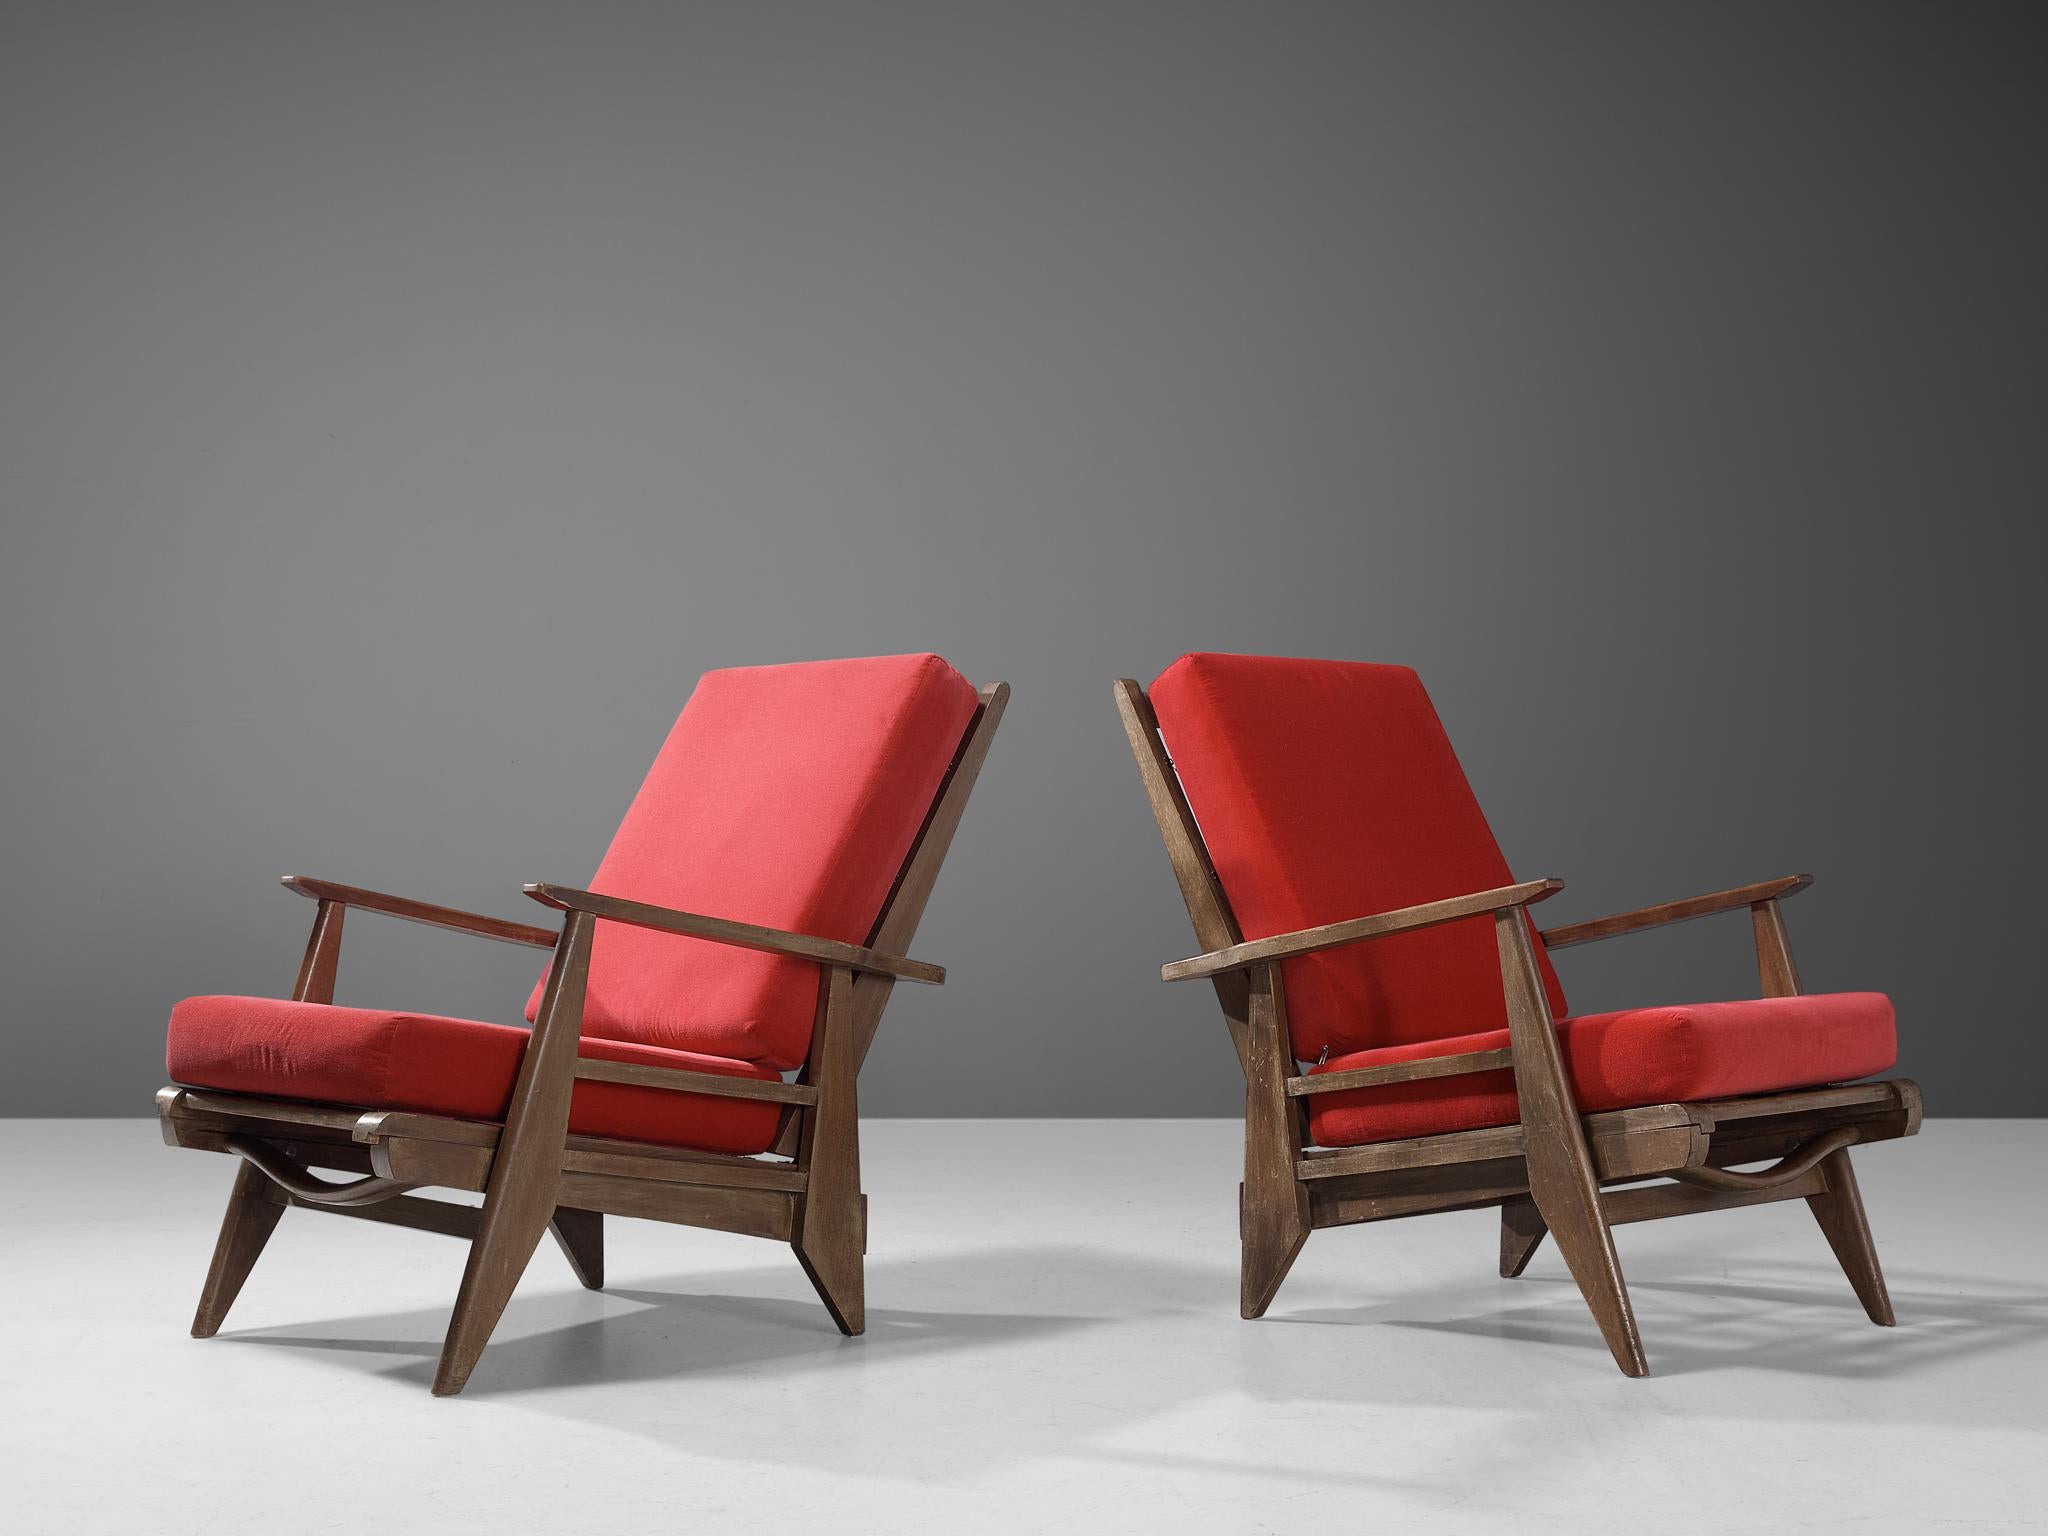 Pair of armchairs, beech, metal, fabric, France, 1950s 

These armchairs strongly remind of the iconic chairs created by the talented French designer René Gabriel (1899-1950), who is known for his reconstructivist approach to furniture design. The